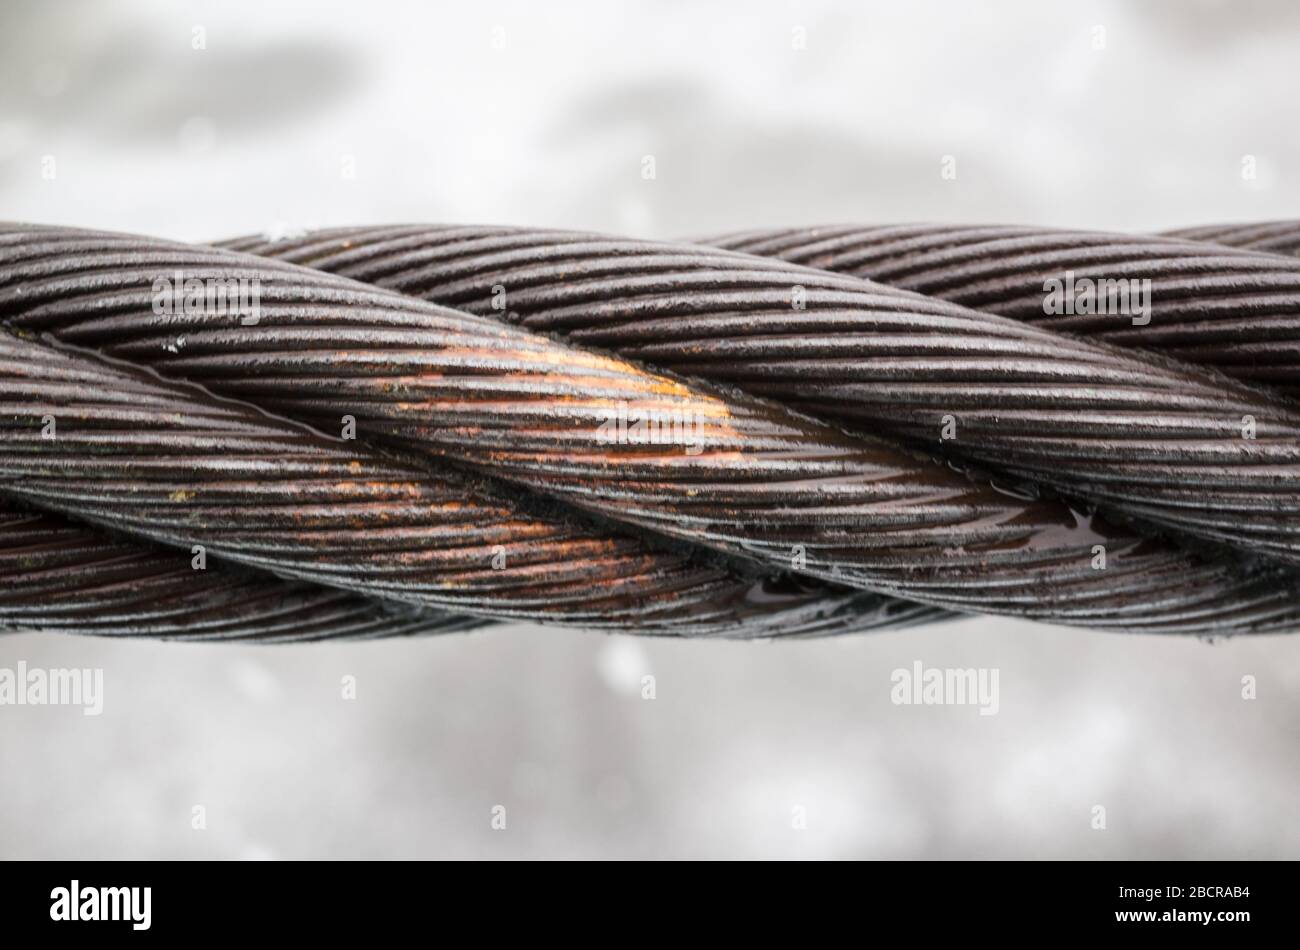 Steel rope with rusty spots, macro photo with selective focus Stock Photo